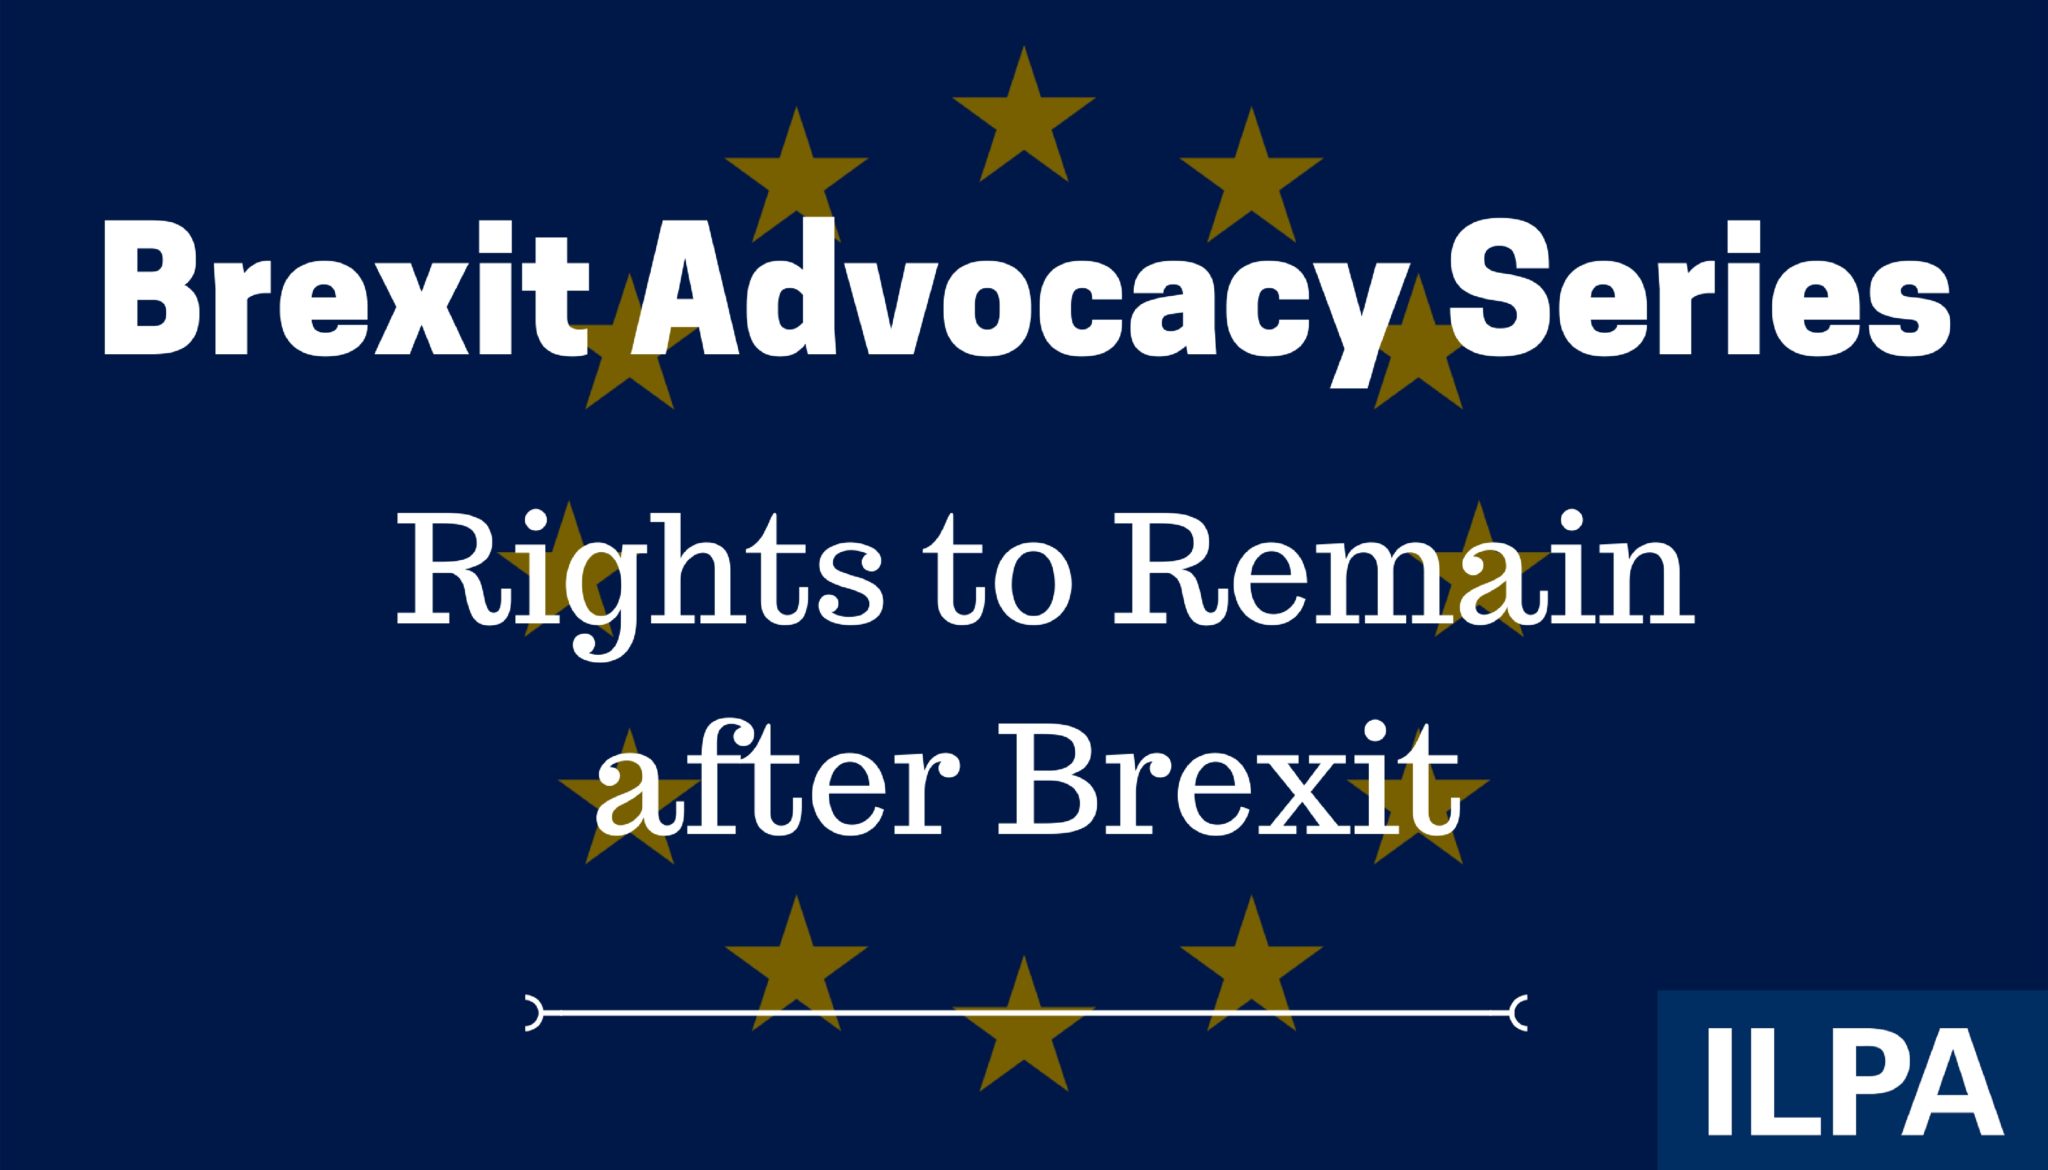 Brexit briefing: Rights to Remain after Brexit